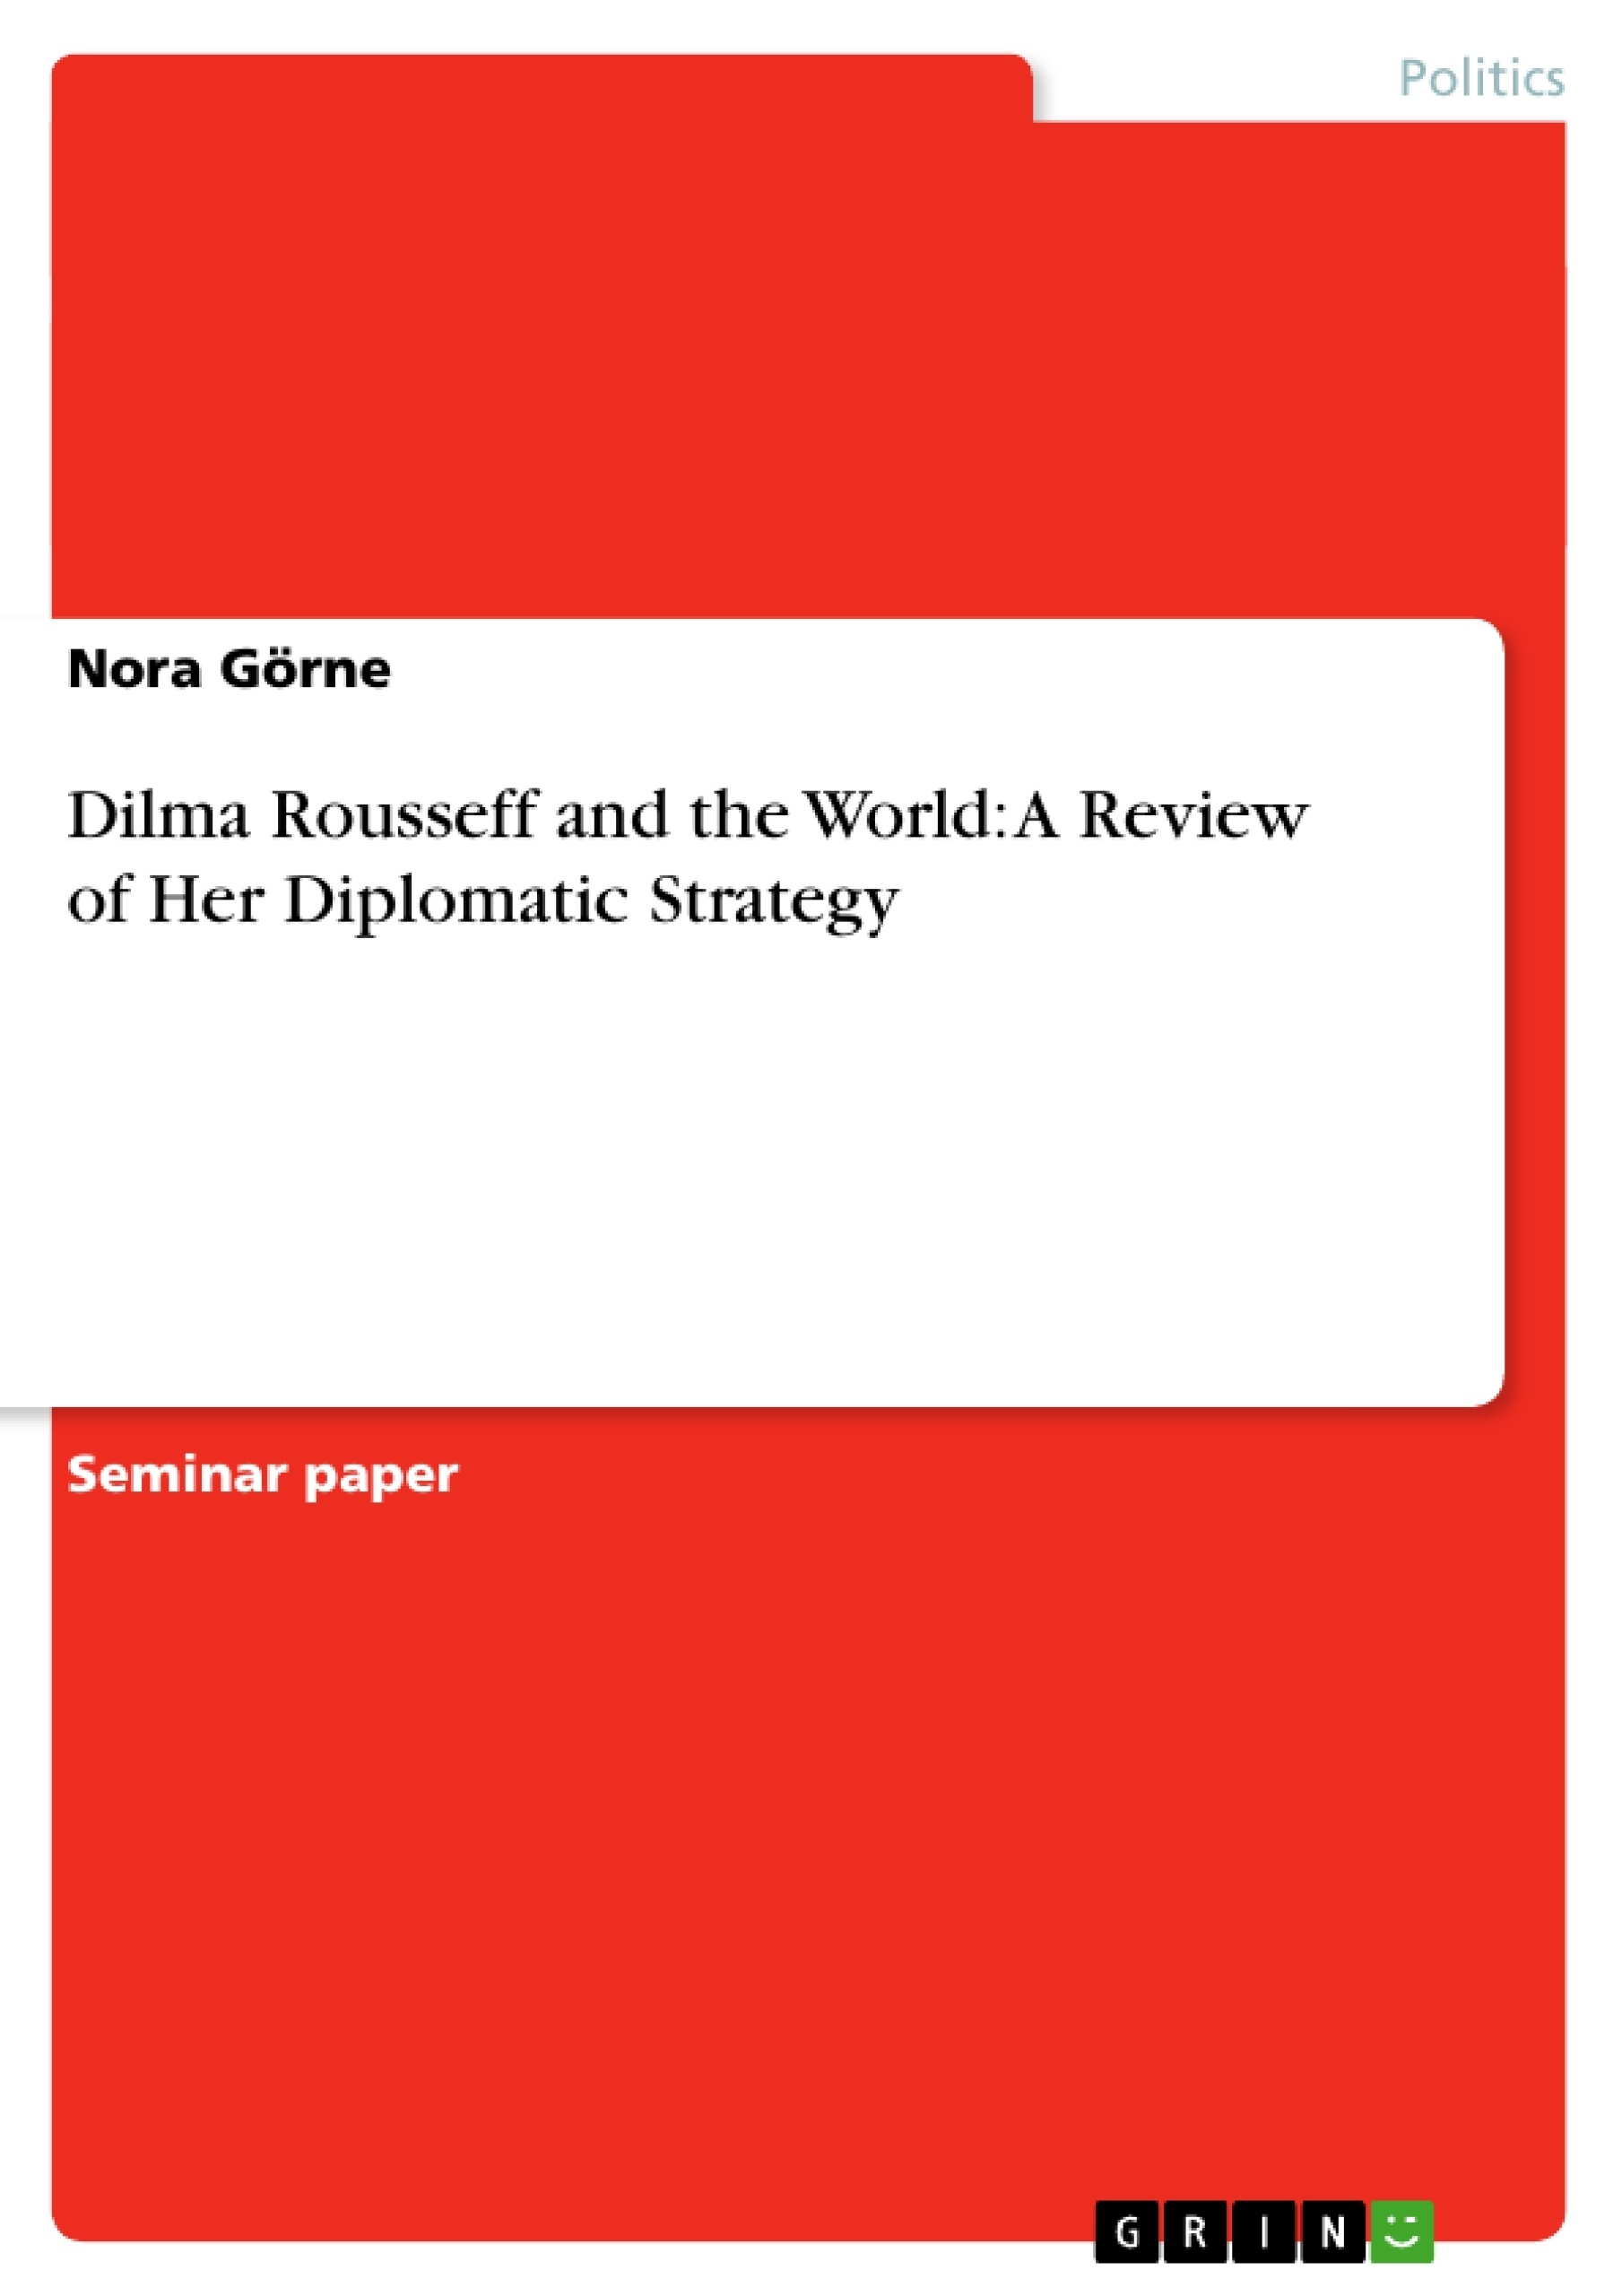 Título: Dilma Rousseff and the World: A Review of Her Diplomatic Strategy